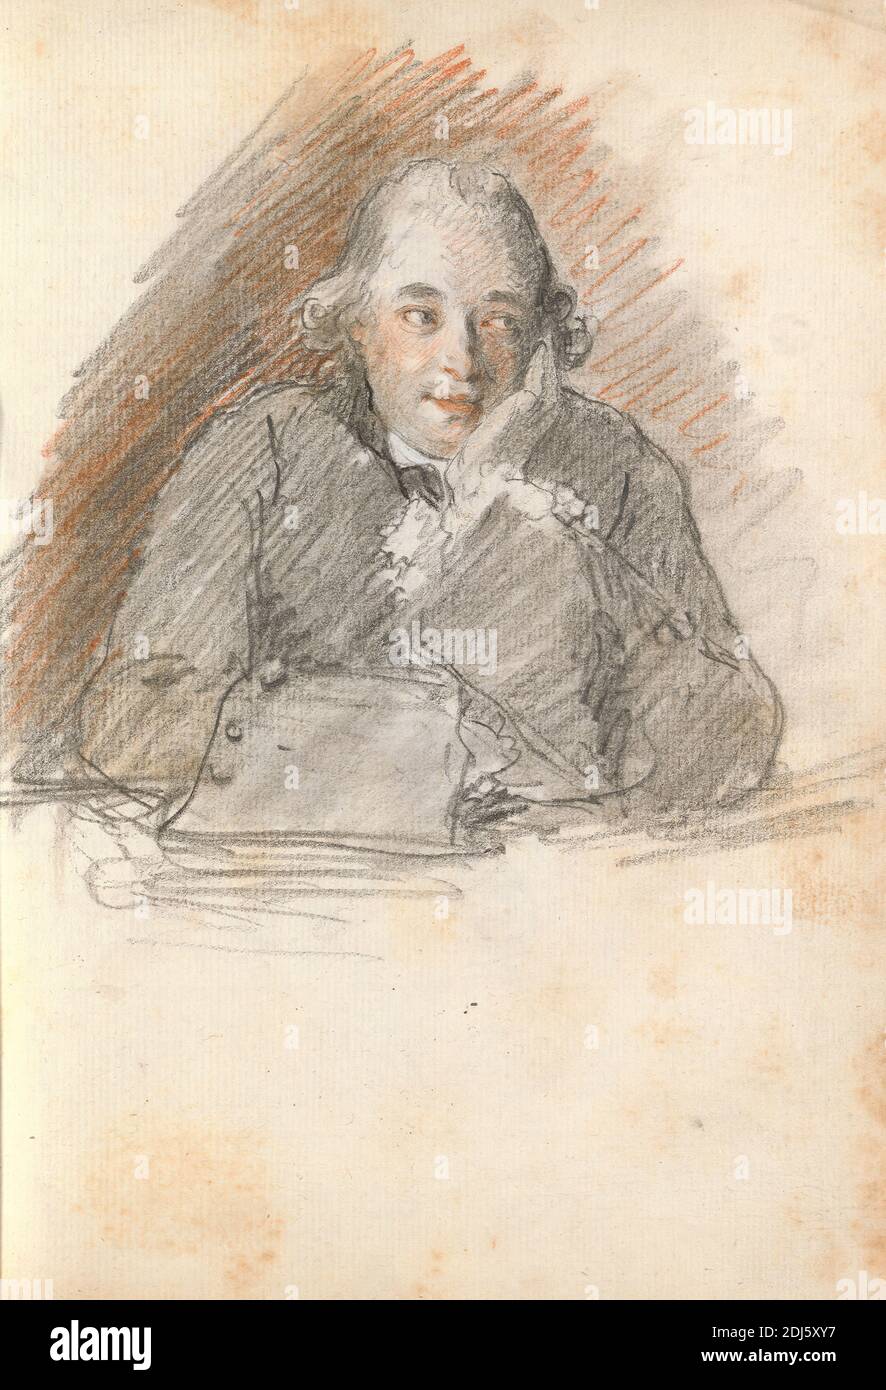 Head and Shoulders of a Man Seated at a Table, Resting His Head on His Left Hand, Thomas Patch, 1725–1782, British, 1760s, Black chalk and red chalk on medium, slightly textured, cream laid paper bound in carta fiorentina, Sheet: 8 3/4 x 6 1/2 inches (22.2 x 16.5 cm) and Spine: 8 7/8 inches (22.5 cm), Grand Tour, portrait Stock Photo